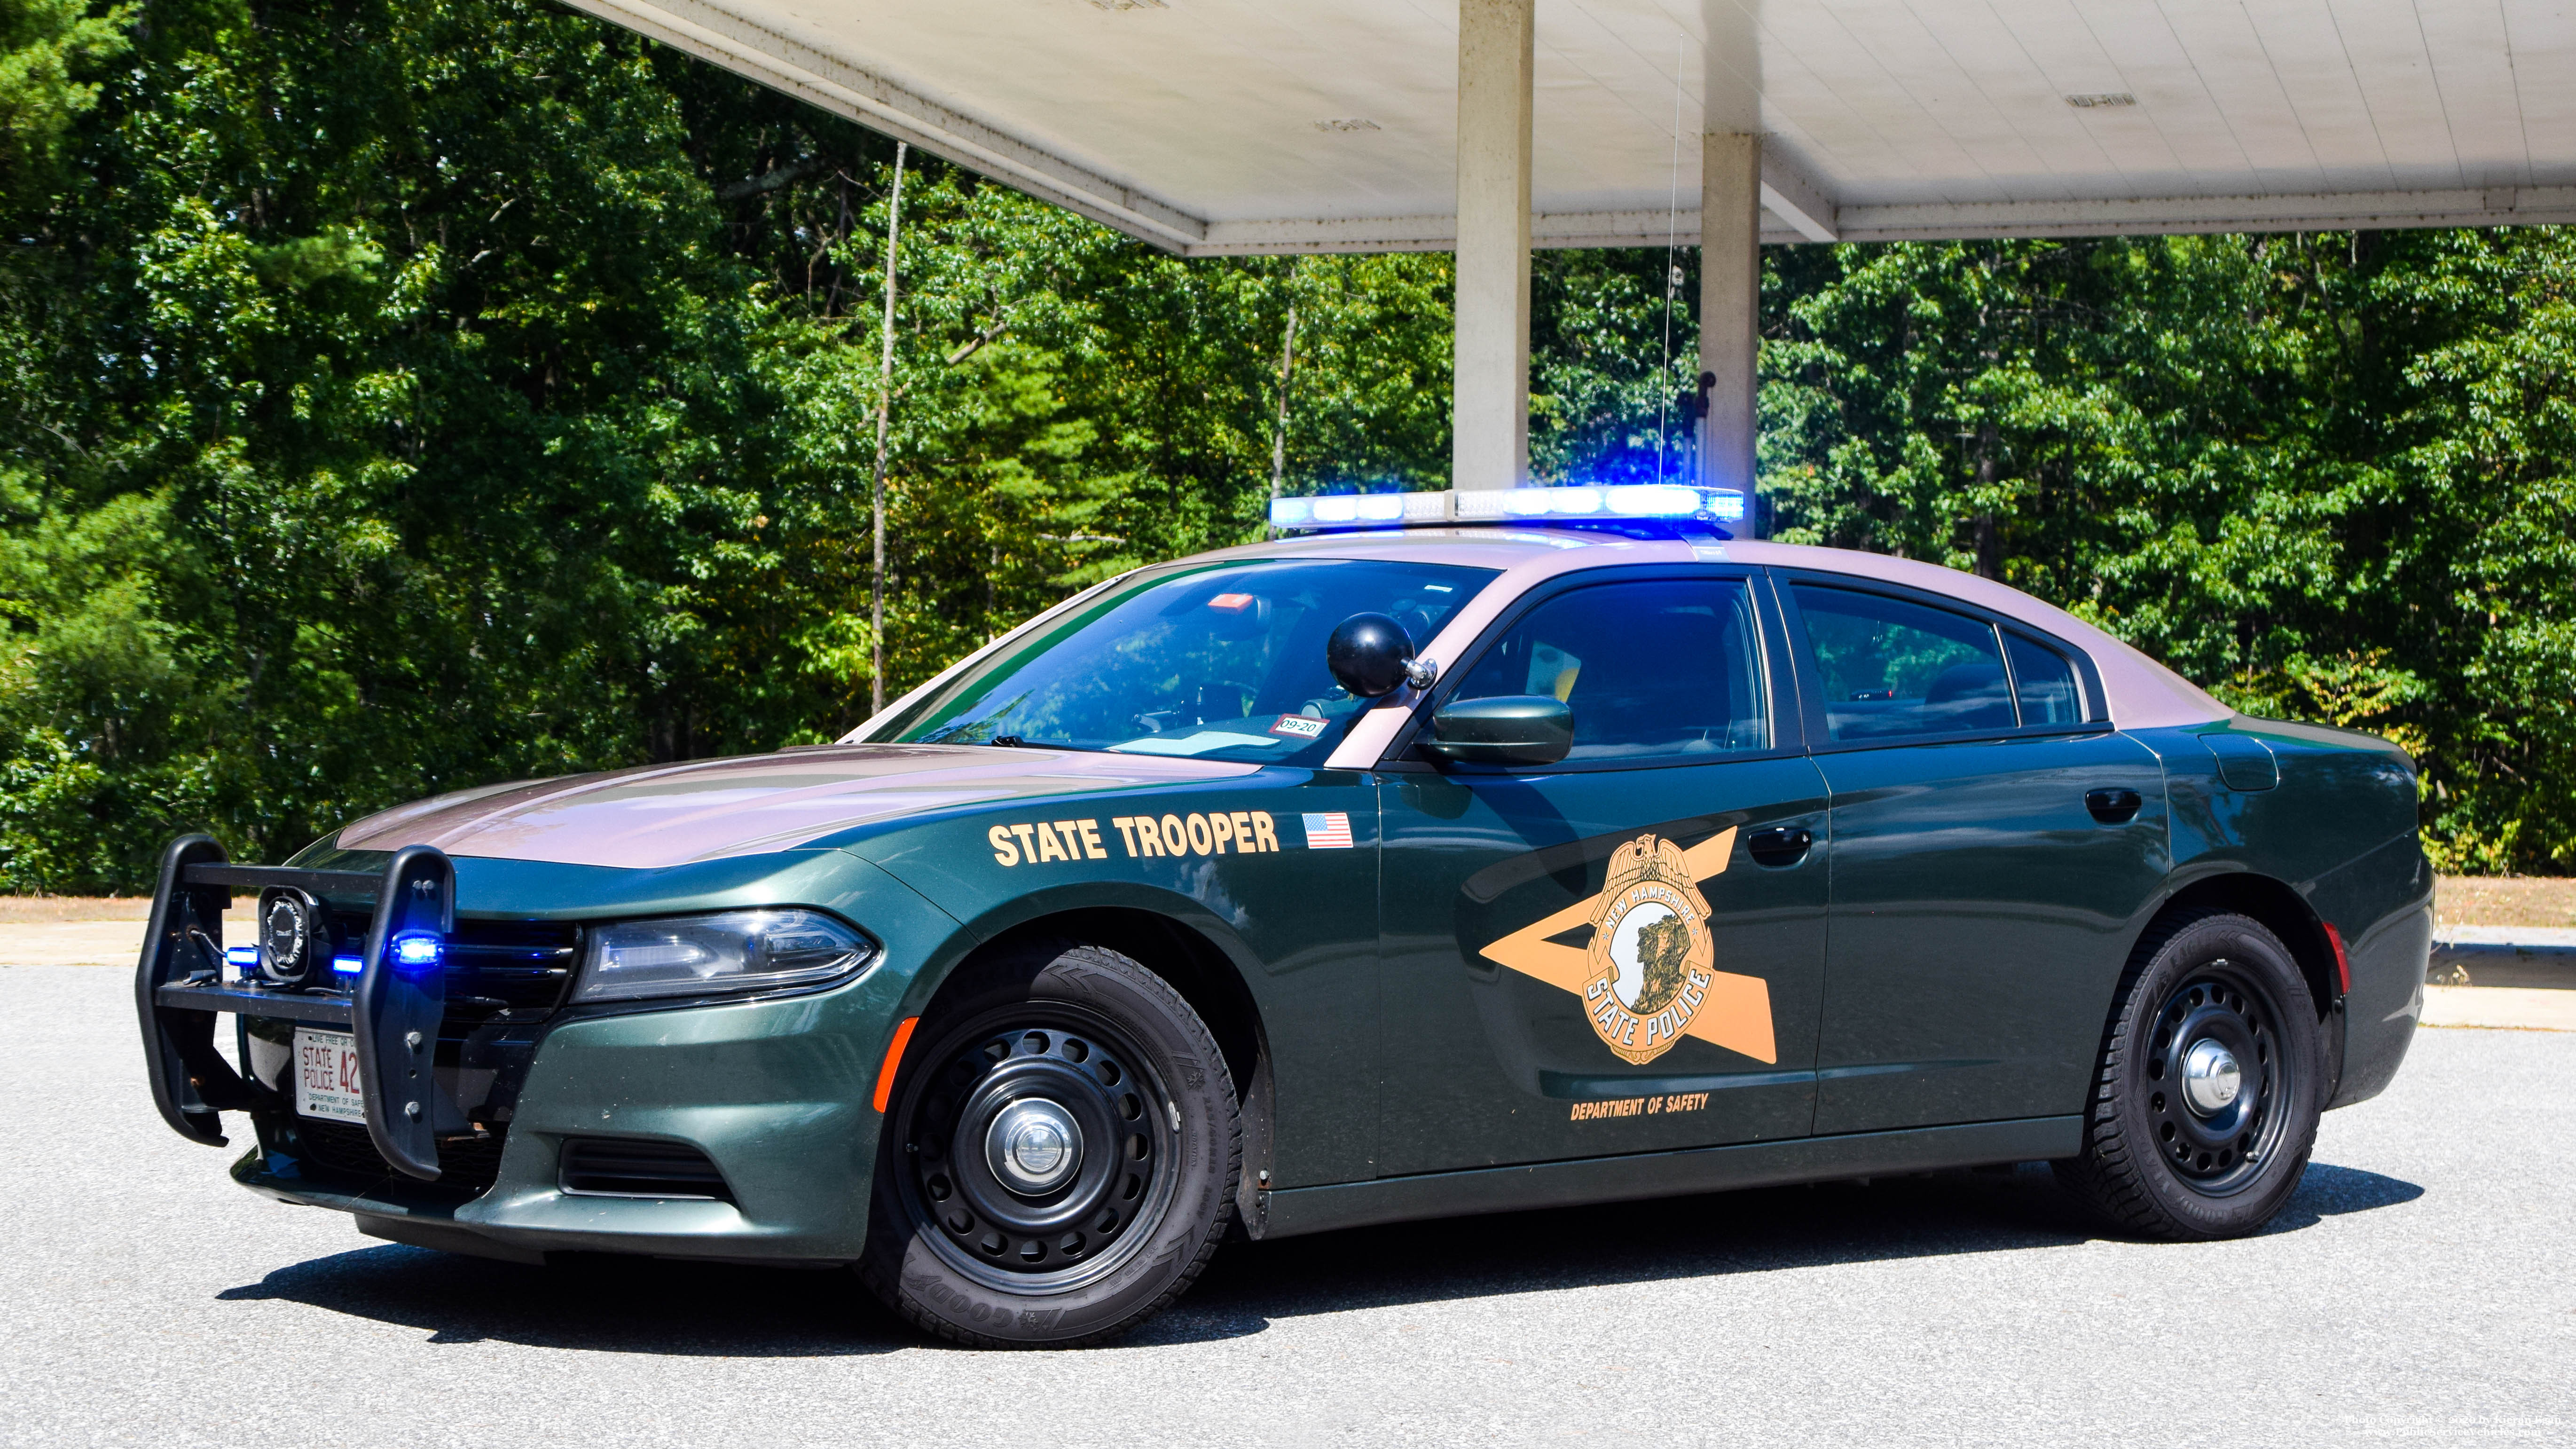 A photo  of New Hampshire State Police
            Cruiser 426, a 2015 Dodge Charger             taken by Kieran Egan